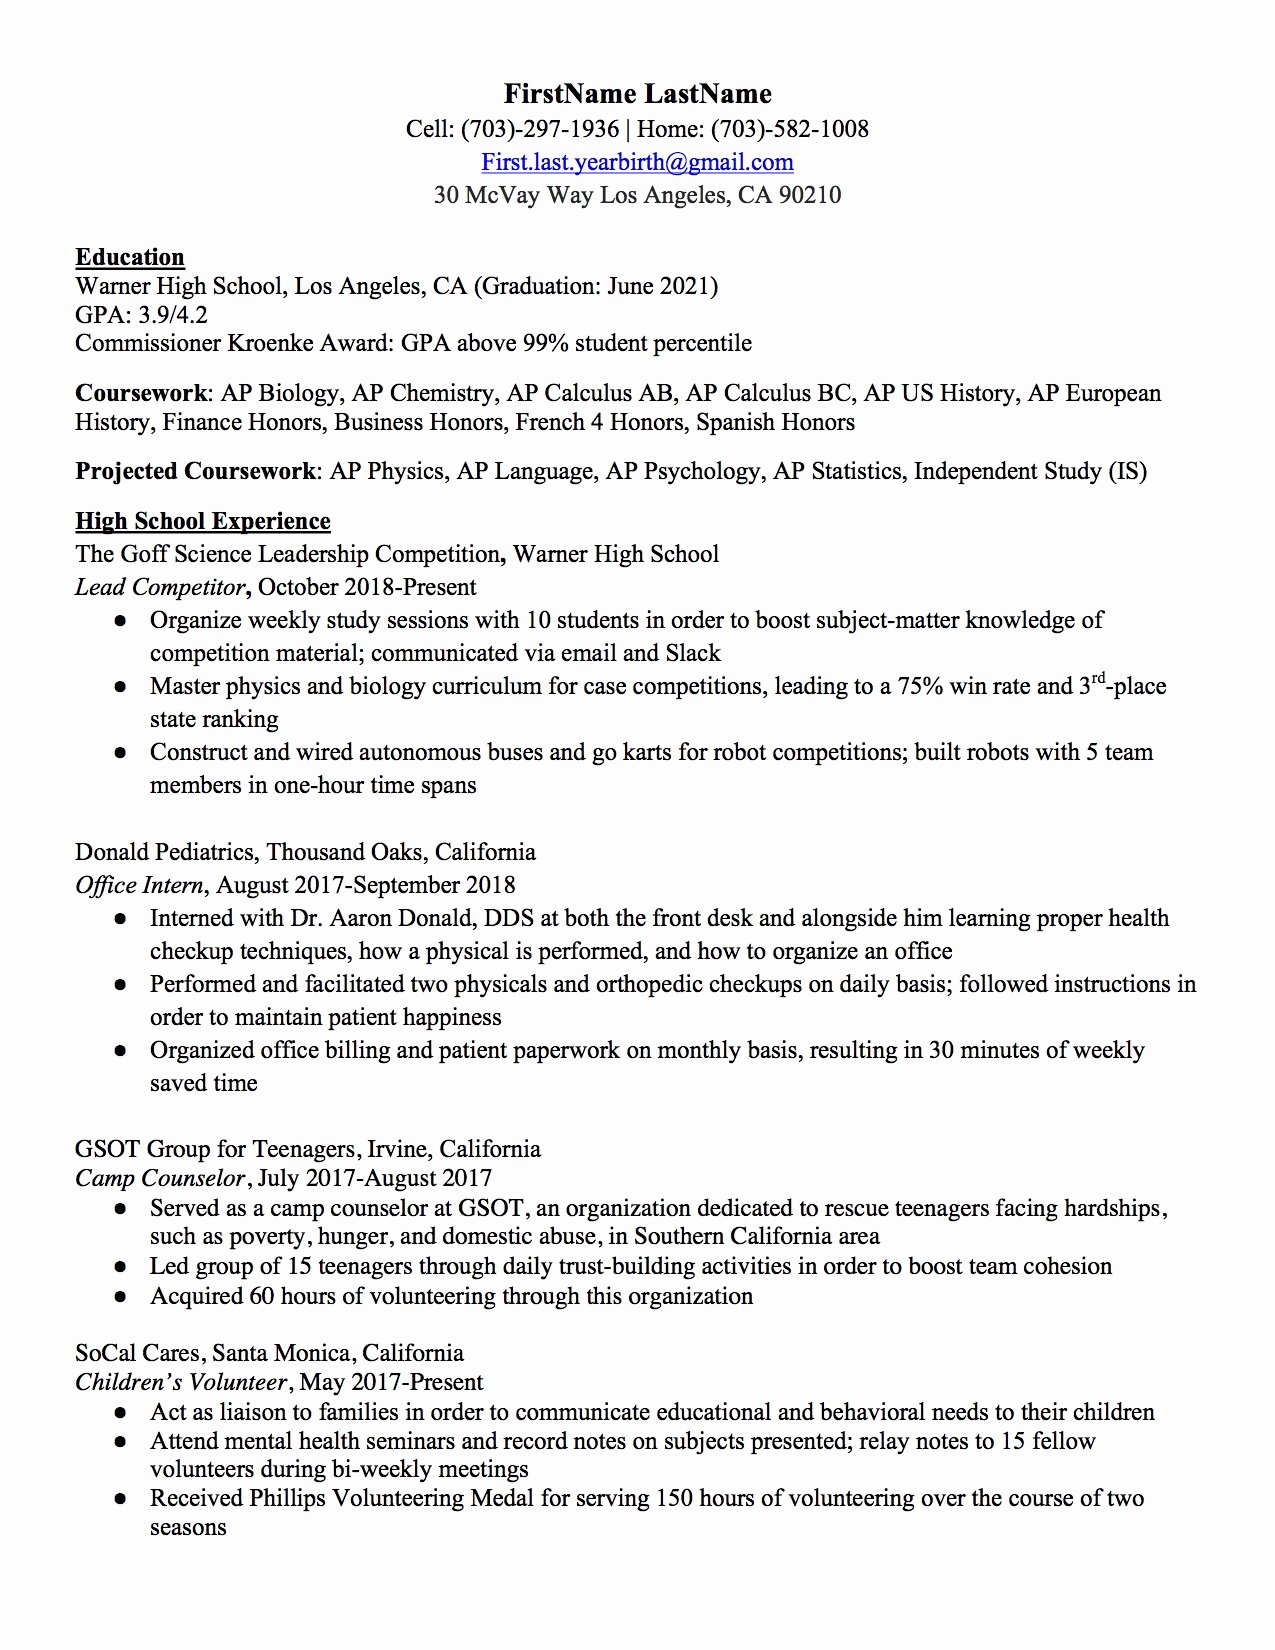 Honors In Resume Beautiful High School Resume How to Write the Best E Templates